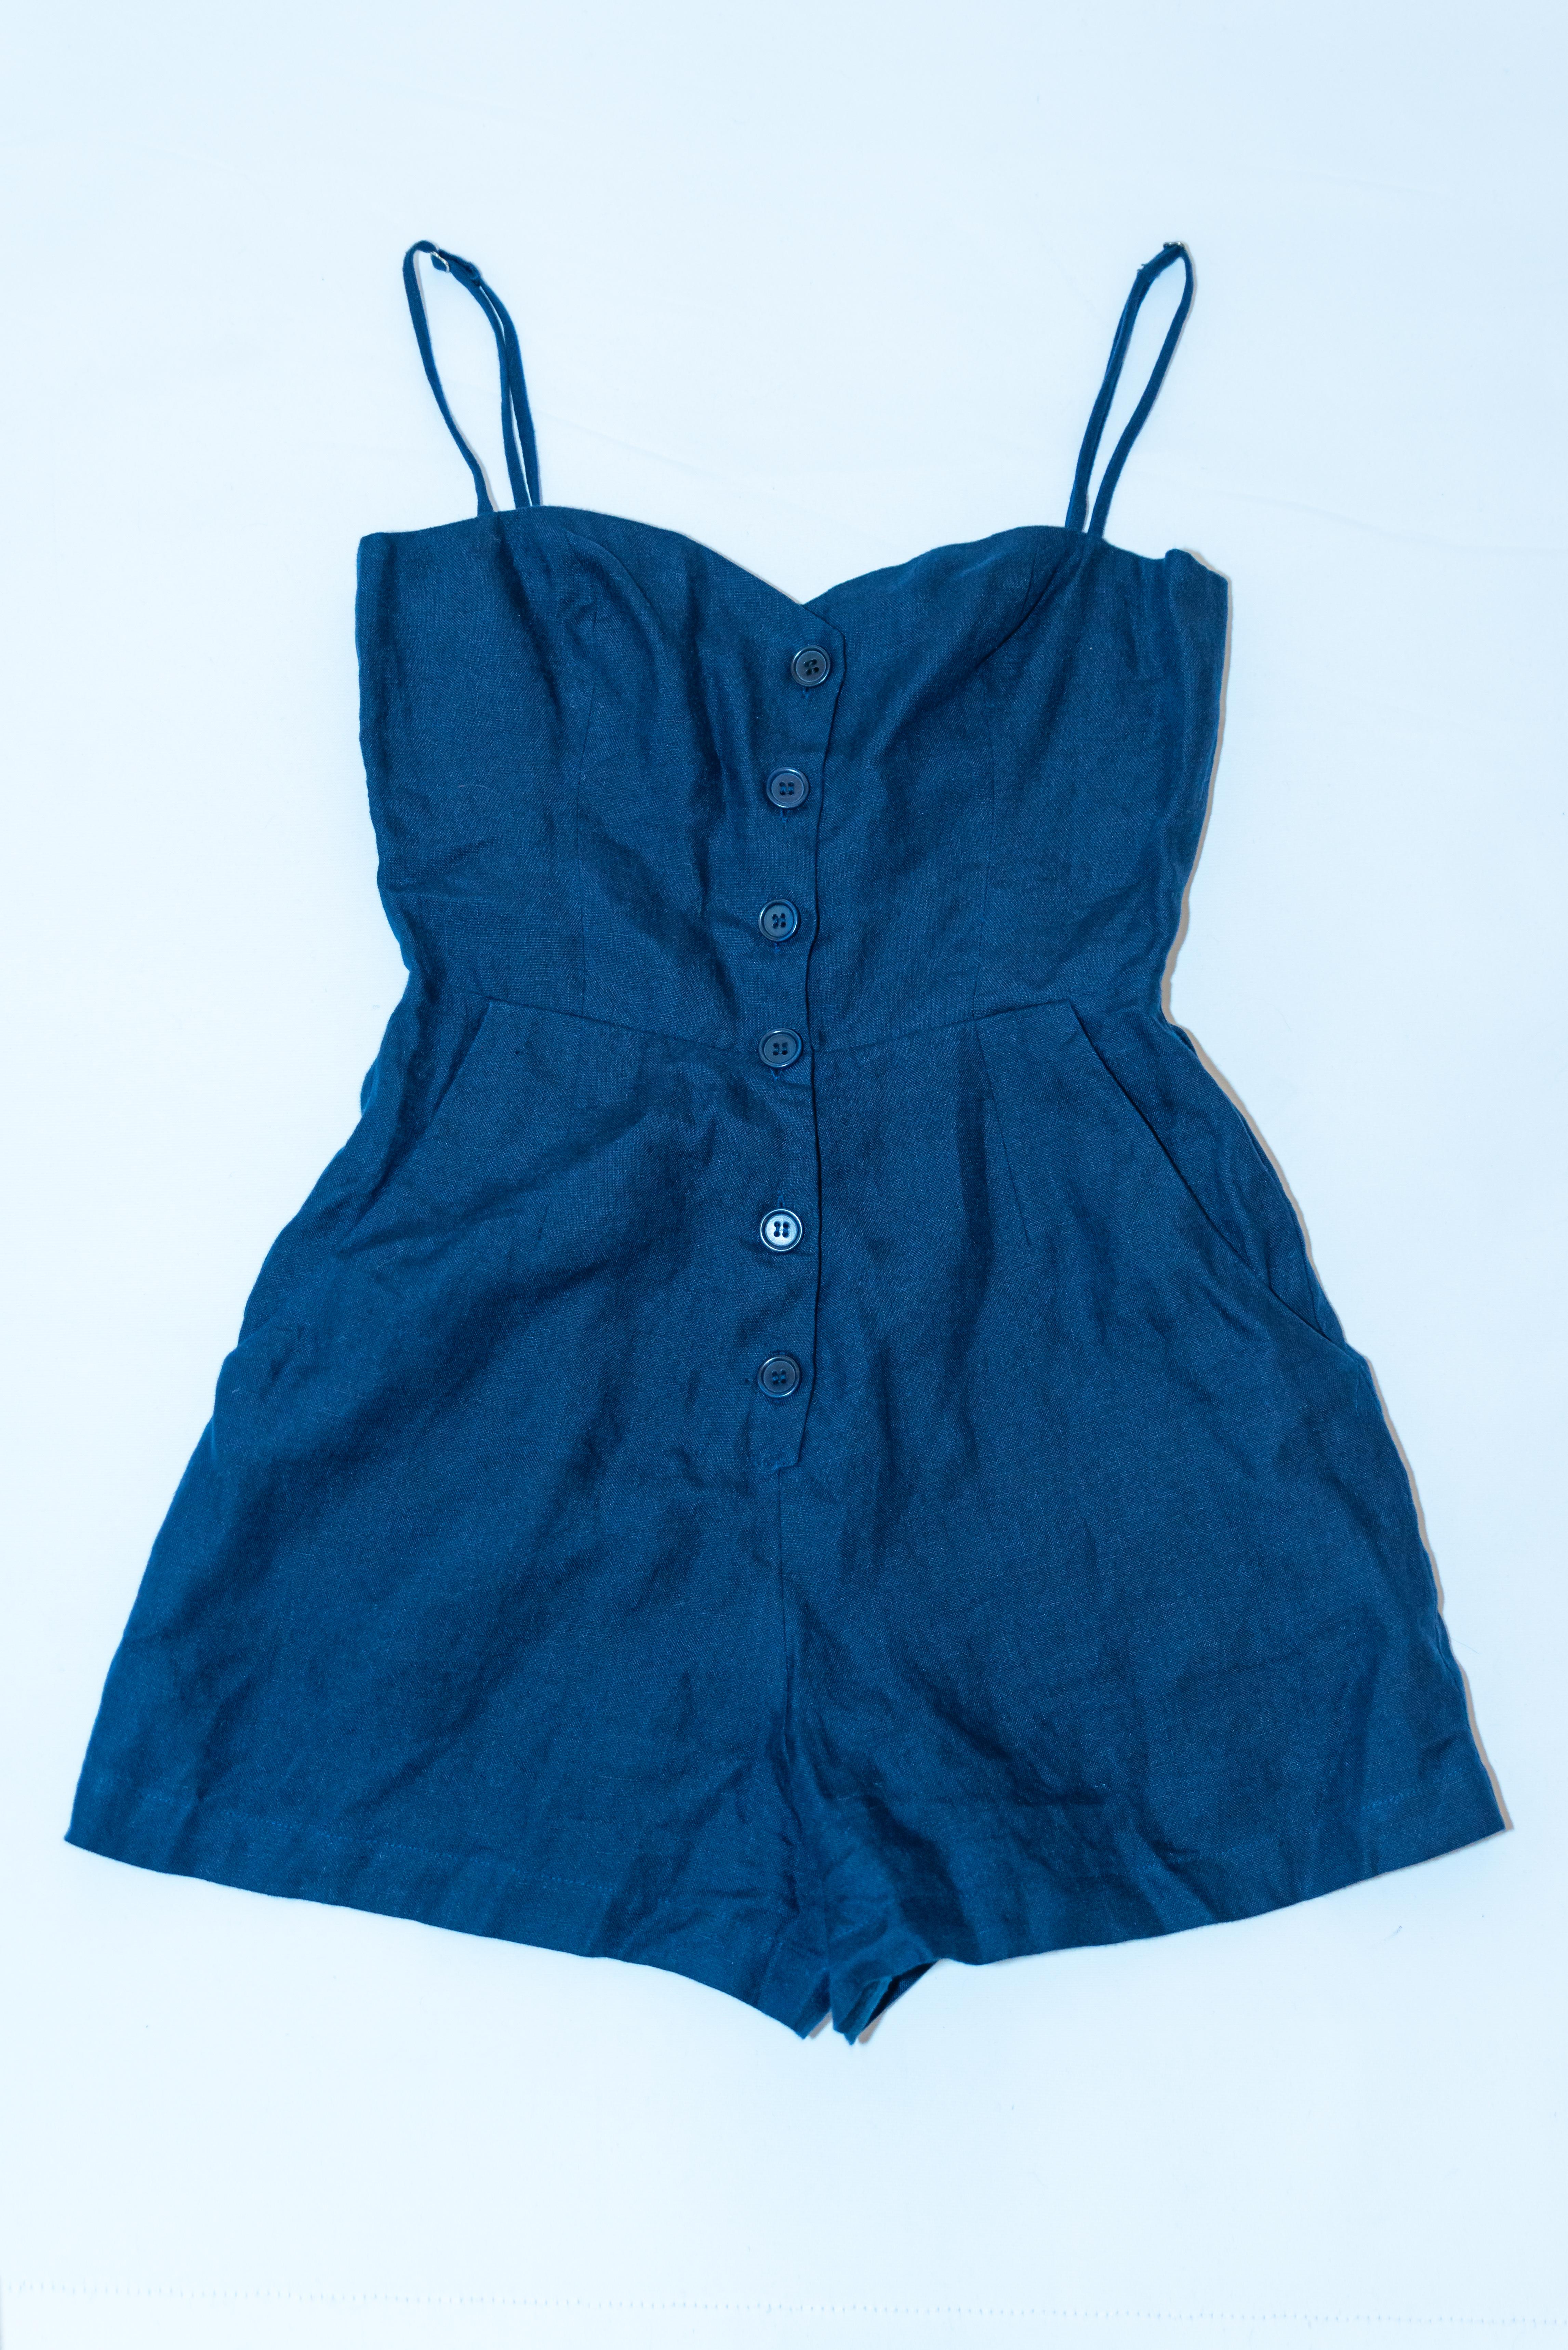 A fun playsuit for the summer weather  by Reformation. The suit has a button front opening, with a pocket on either side , spagetti straps. and is lined. Made in Italy.
Size 0 , Measurements: Bust 34'', Shoulder to hem 29'' , inside leg 3''.